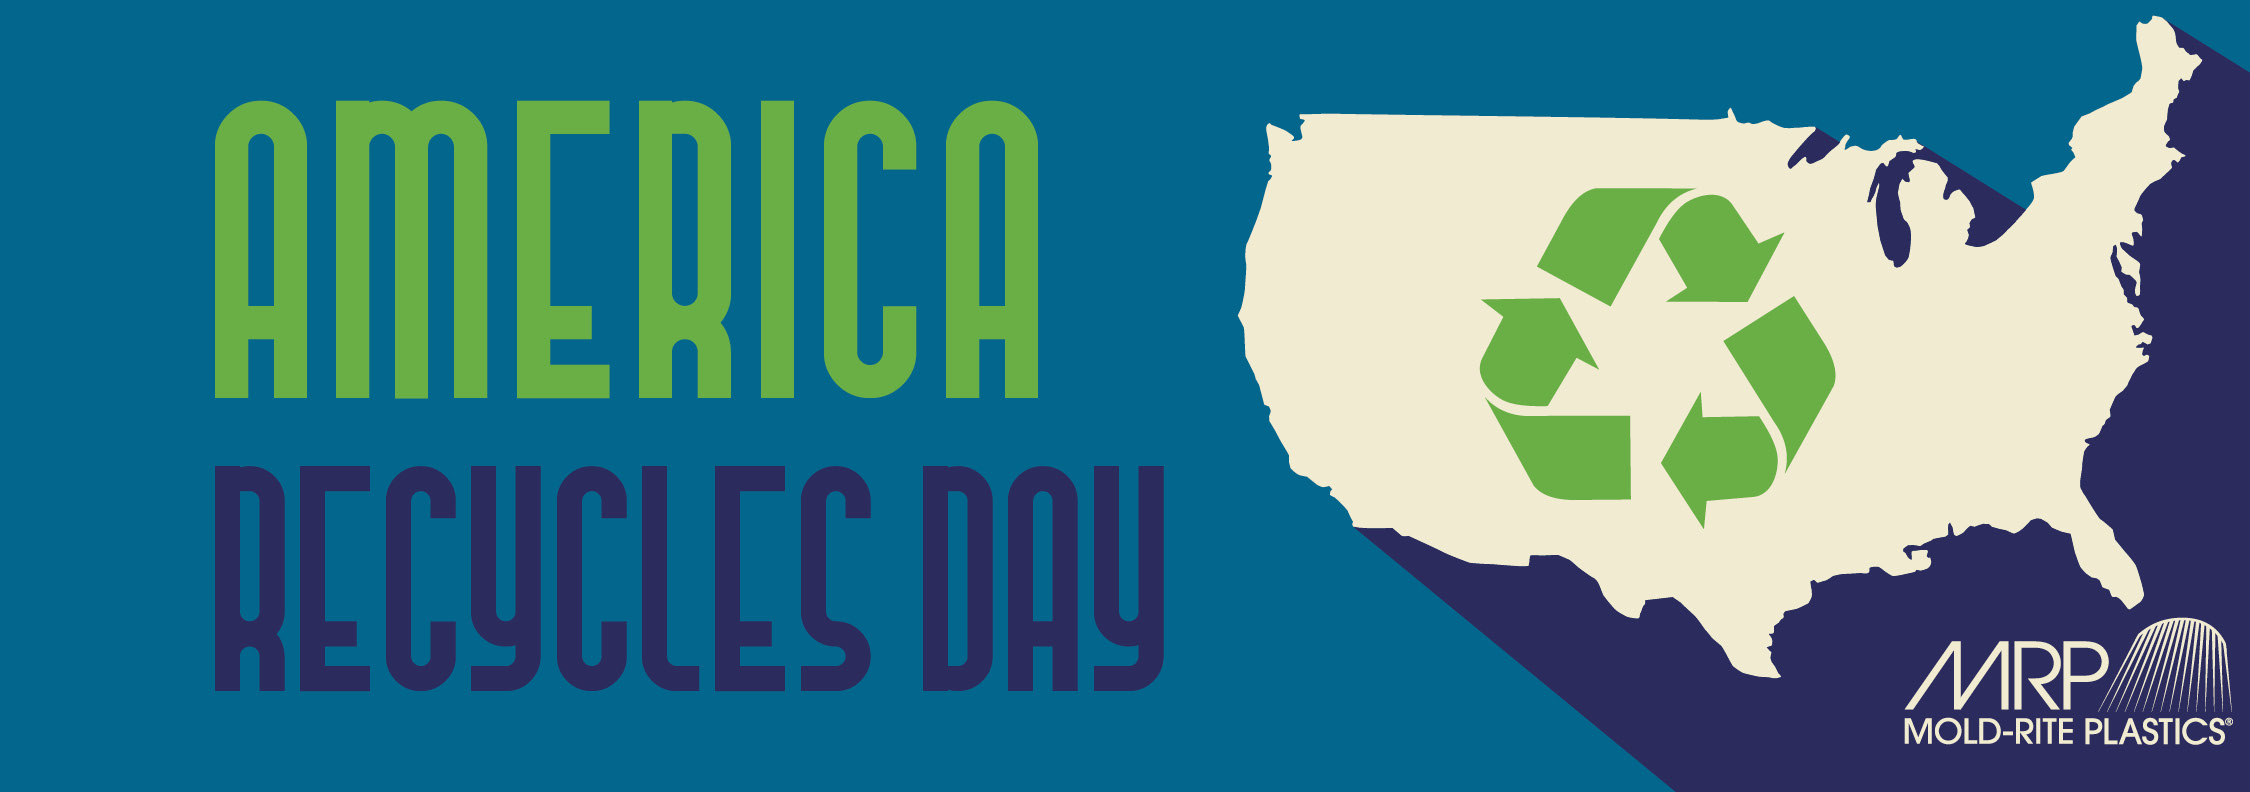 1112-America Recycles Day-banner